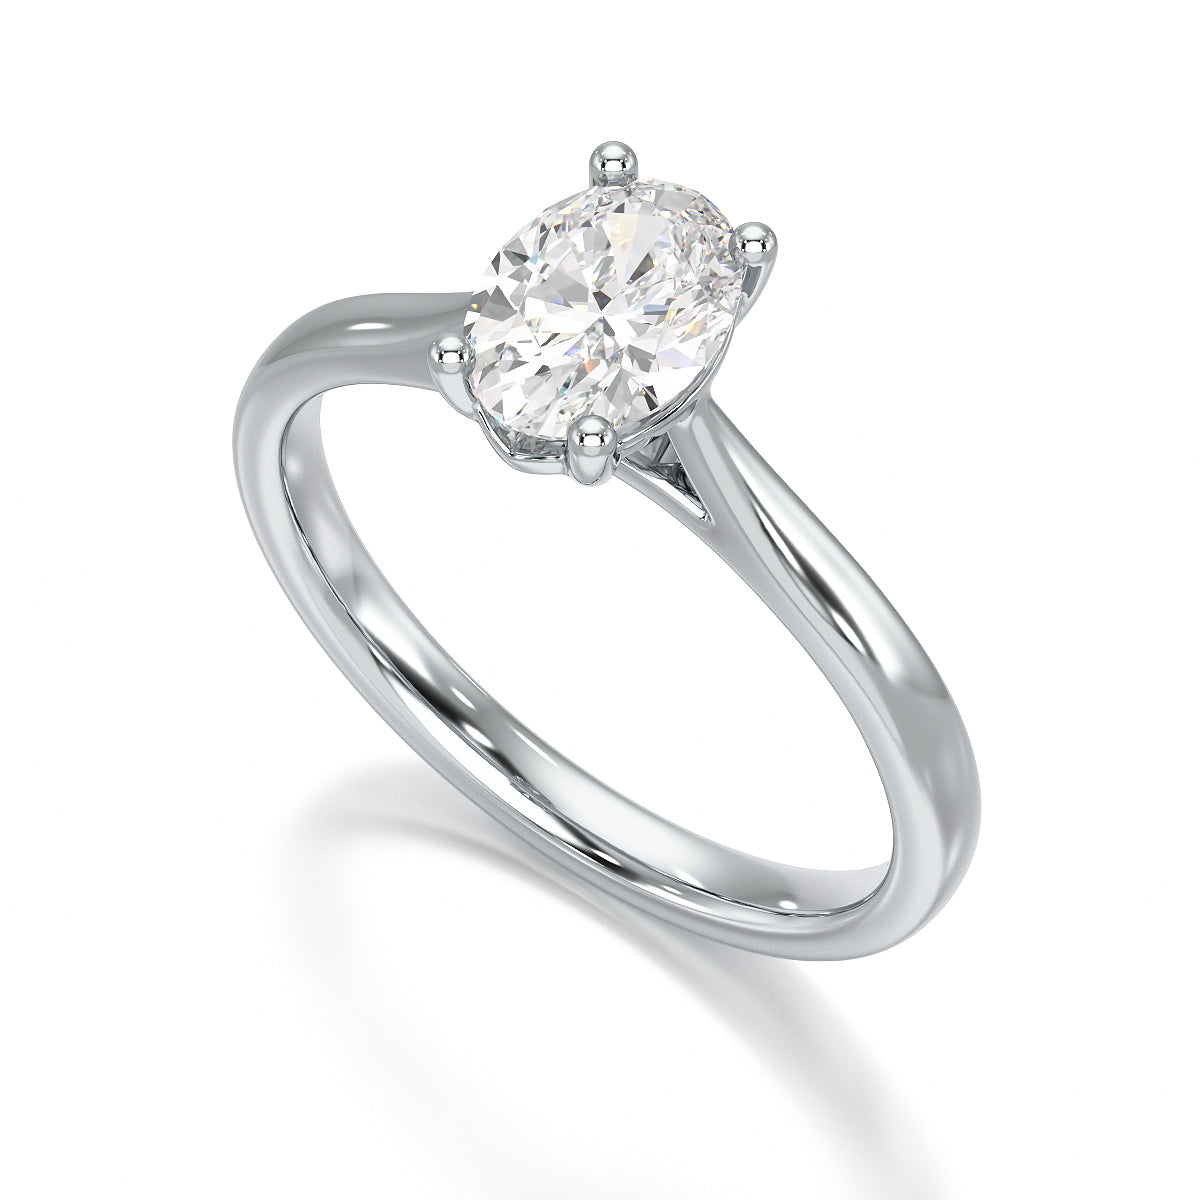 Diamond Engagement Ring- Oval 4 Claw Knife Edge Shoulders